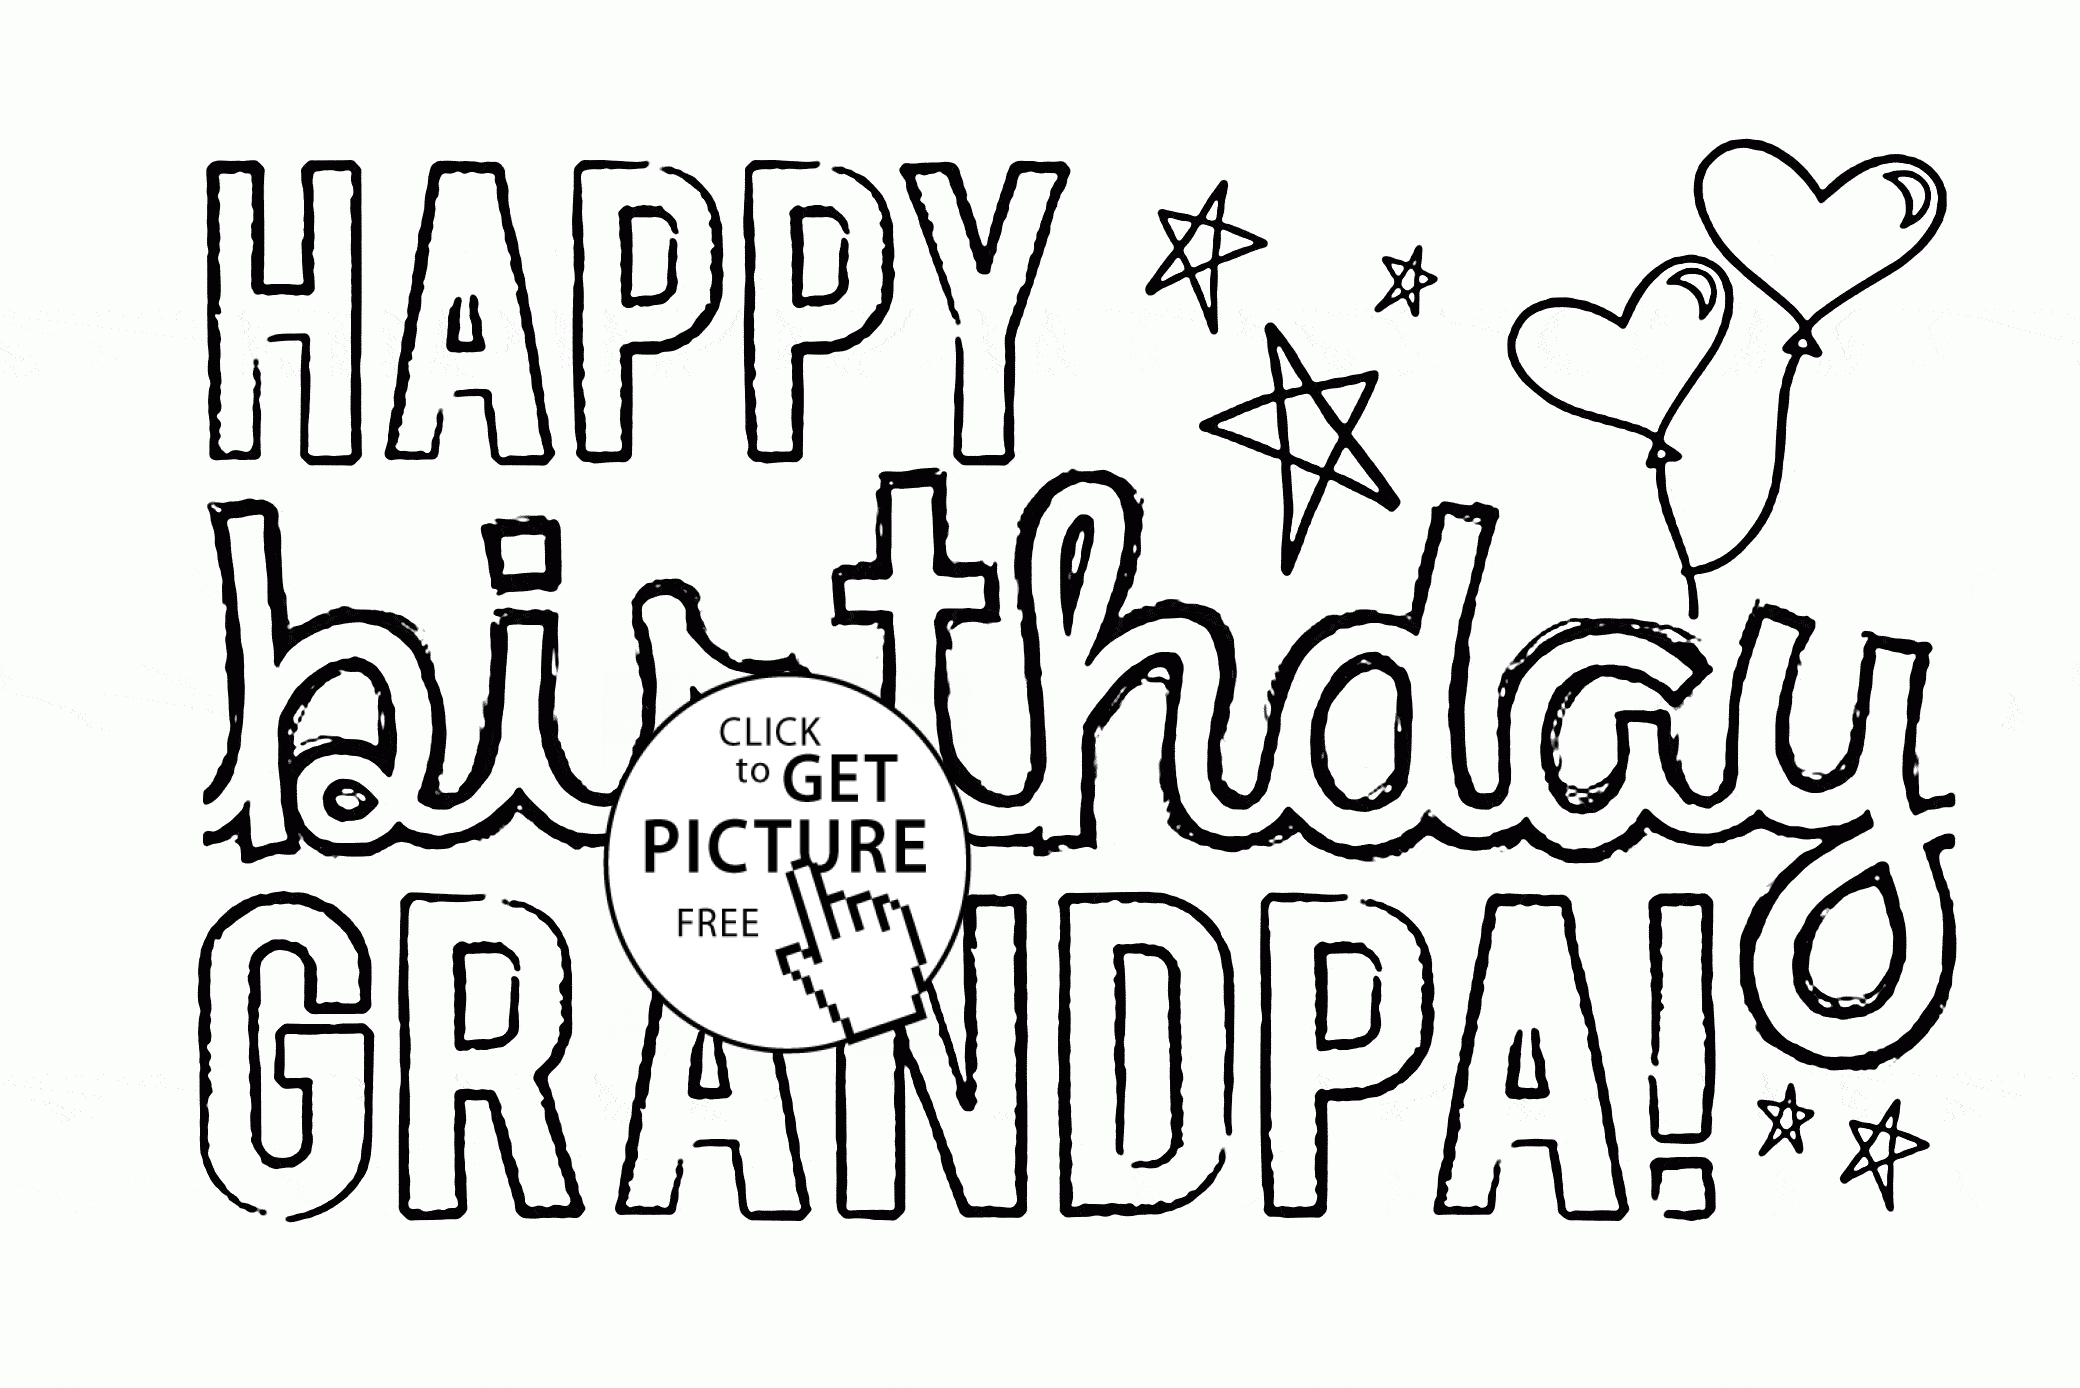 Happy Birthday Grandpa Coloring Page For Kids, Holiday Coloring